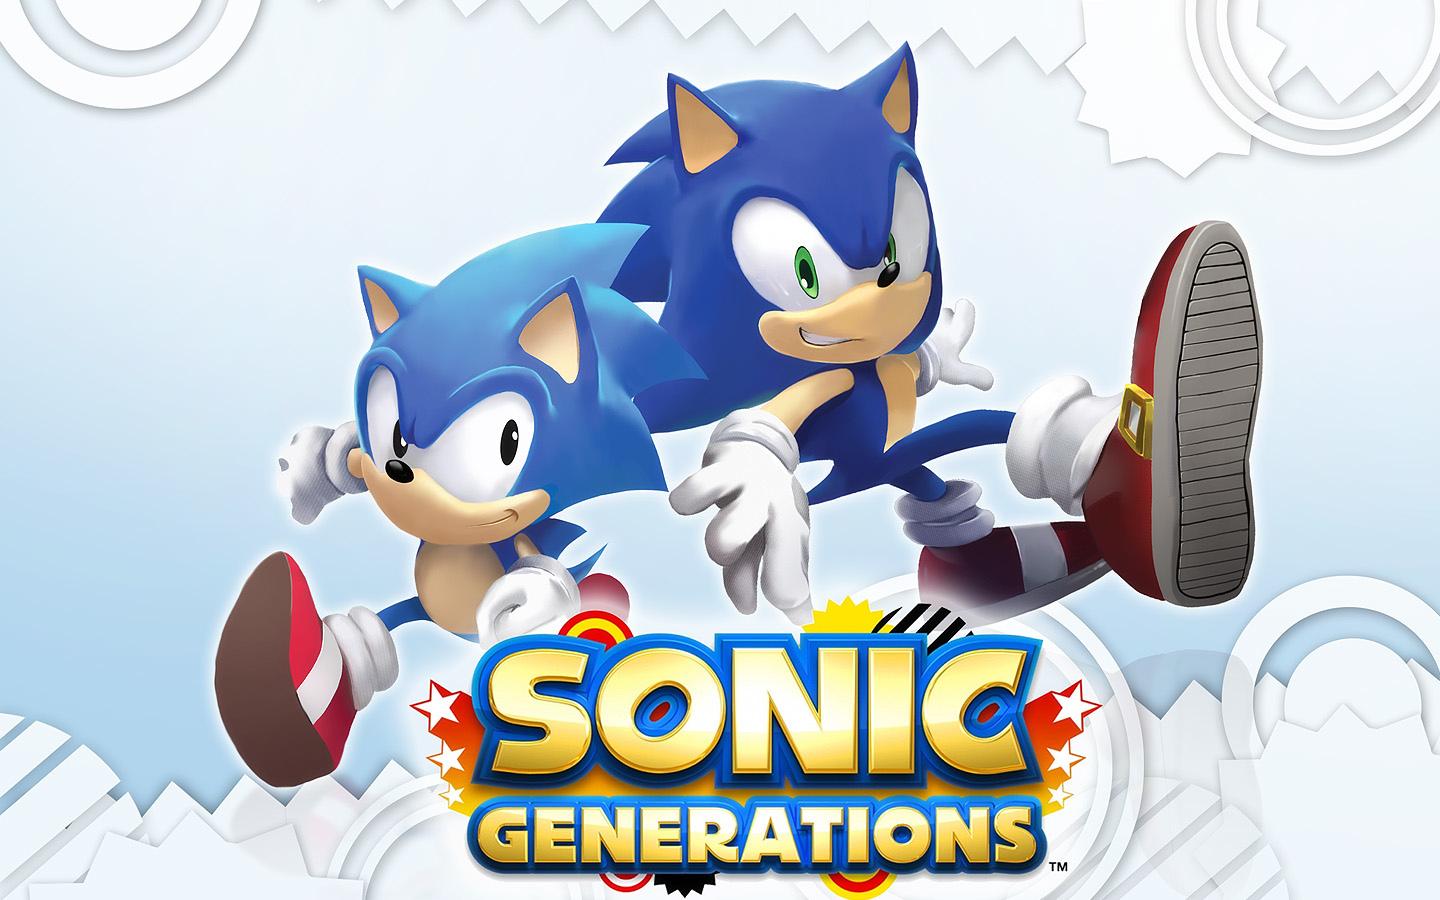 Sonic generations download. Соник генерейшен 2. Соник генерейшен 2д. Классик Соник Generations. Sonic Generations collection.